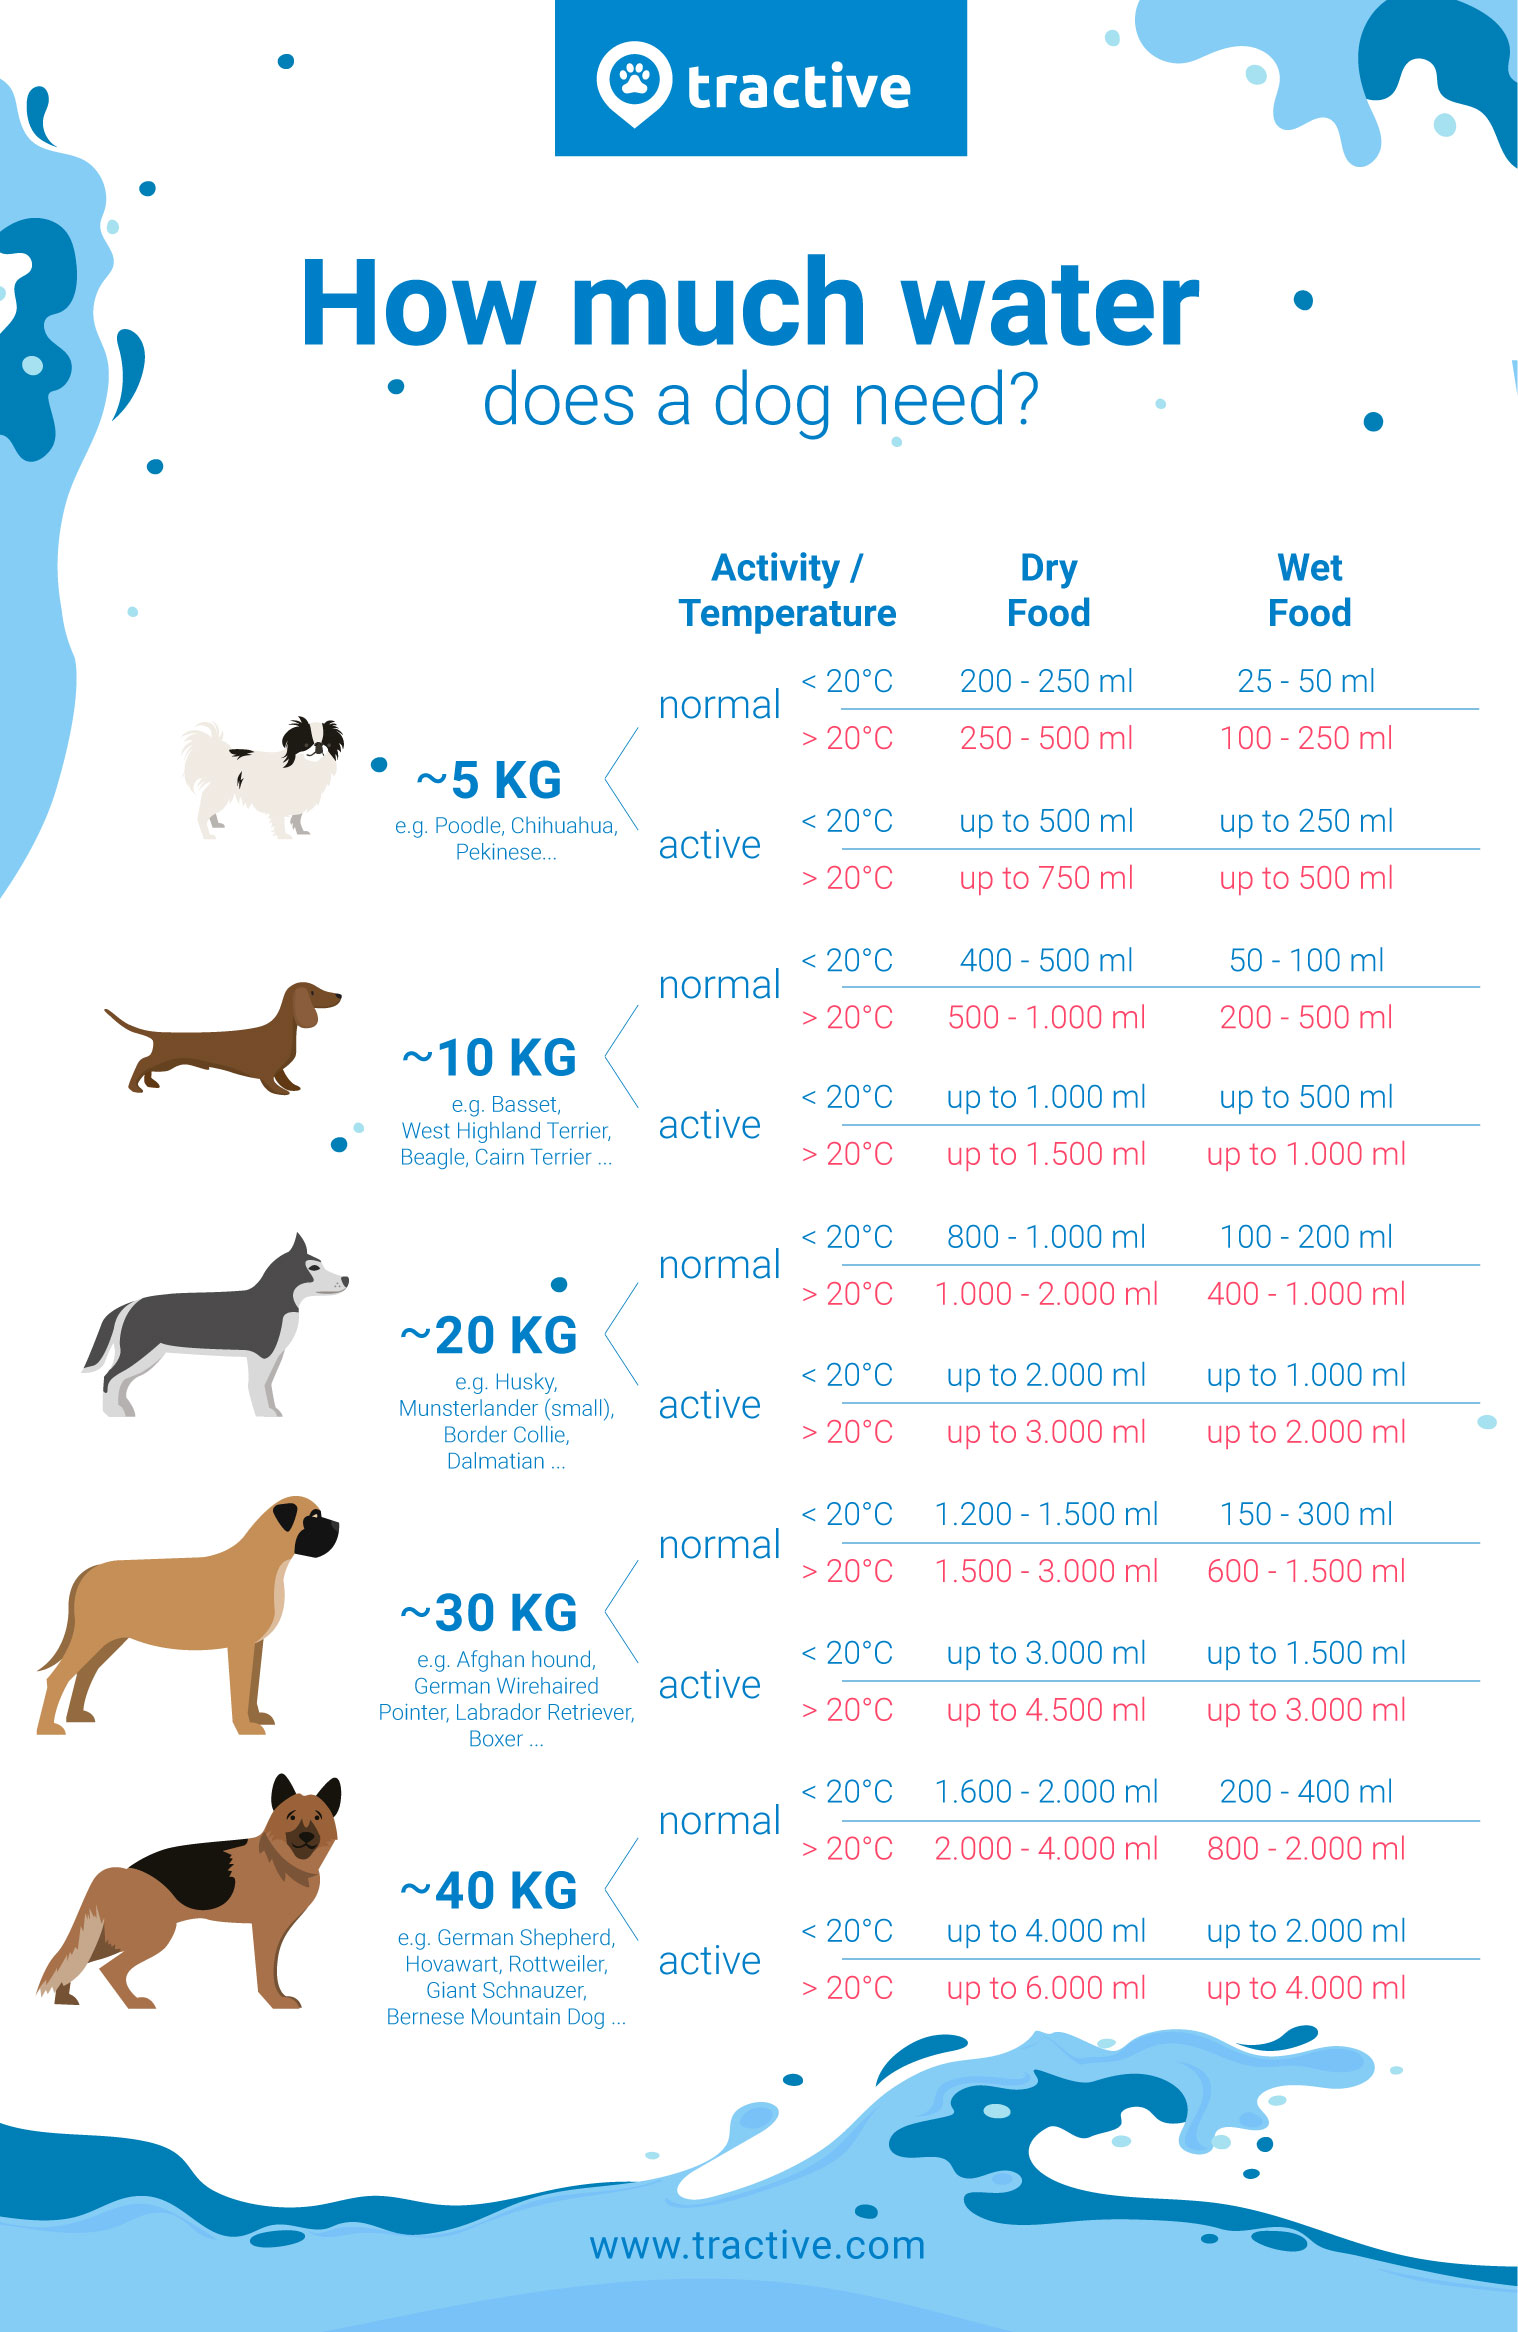 infographic overview of how much water a dog needs by size, activity level, and food type